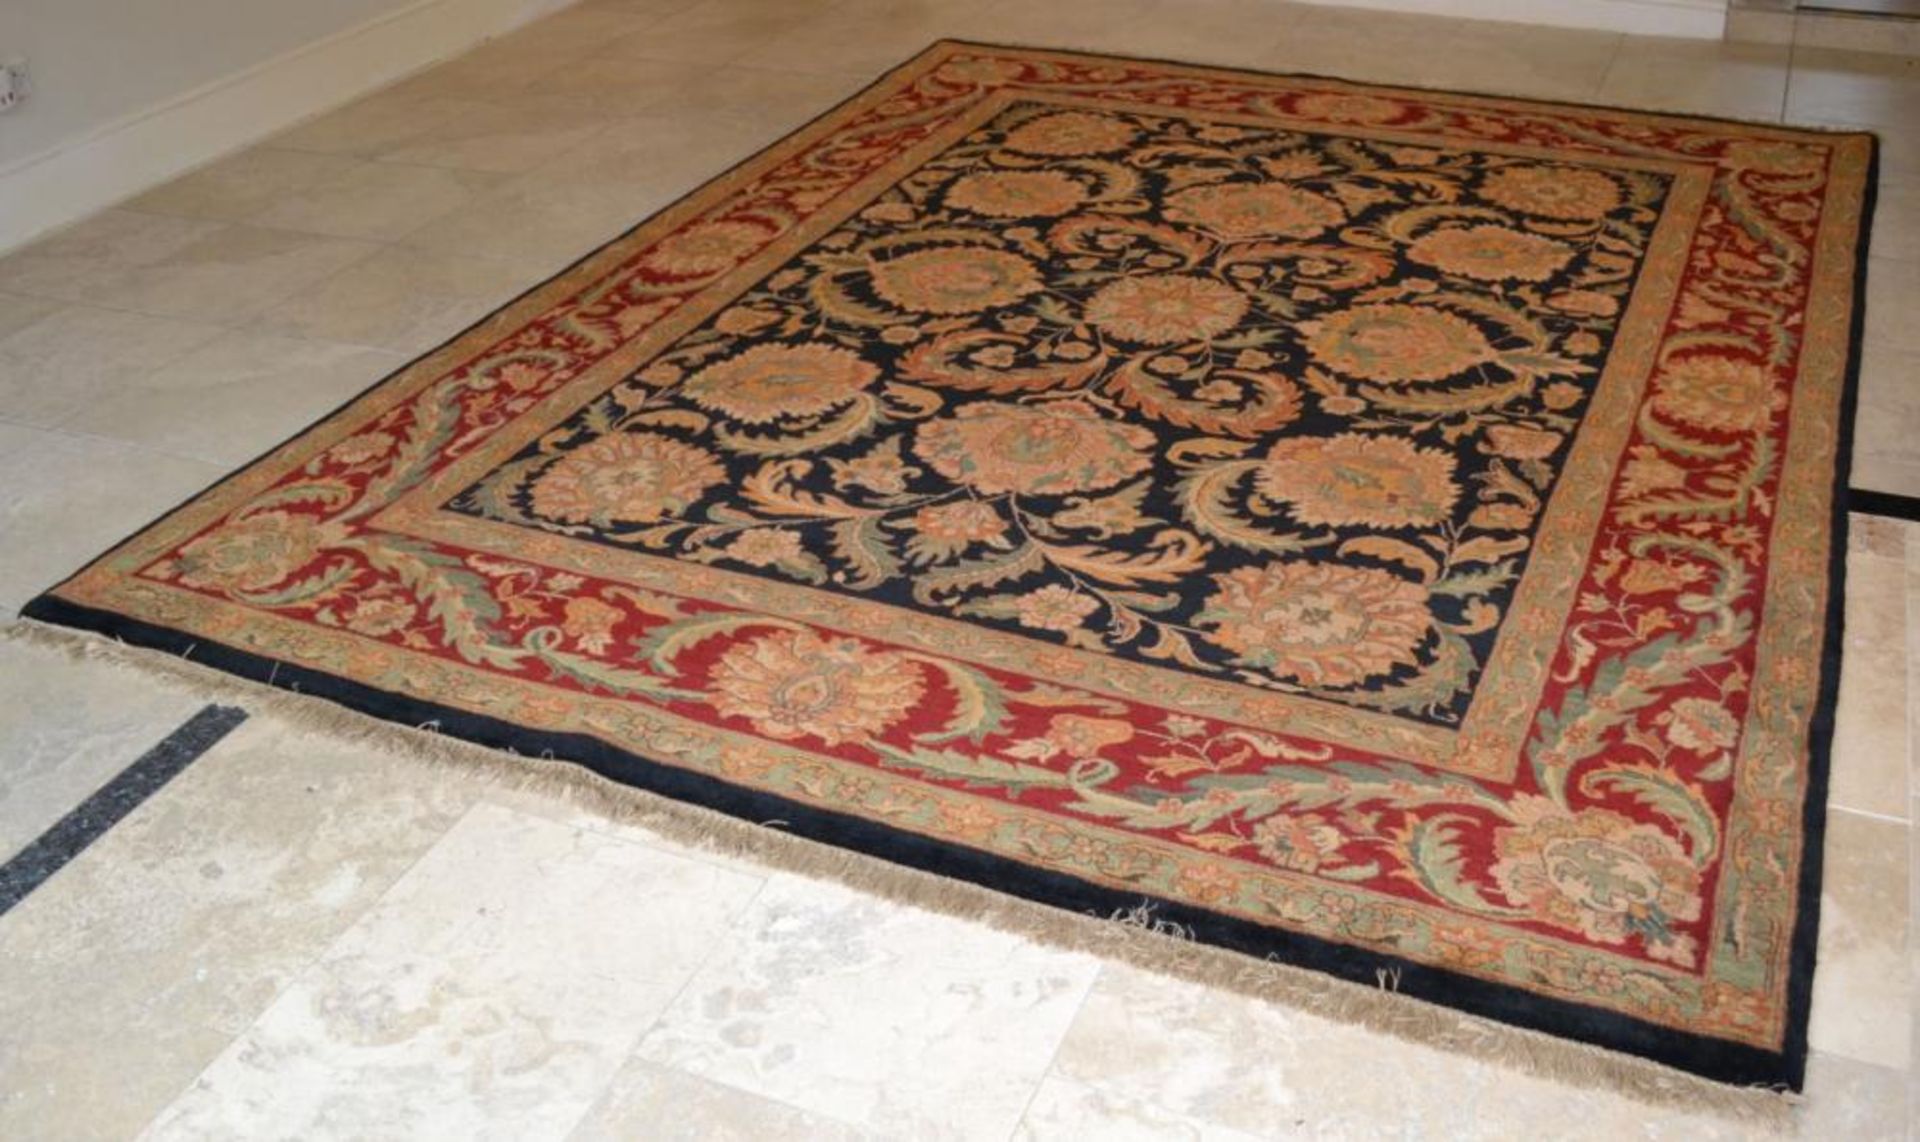 1 x Red and Black Jaipur Handknotted Carpet - Handwoven In Jaipur With Handspun Wool And Vegetable D - Image 9 of 16